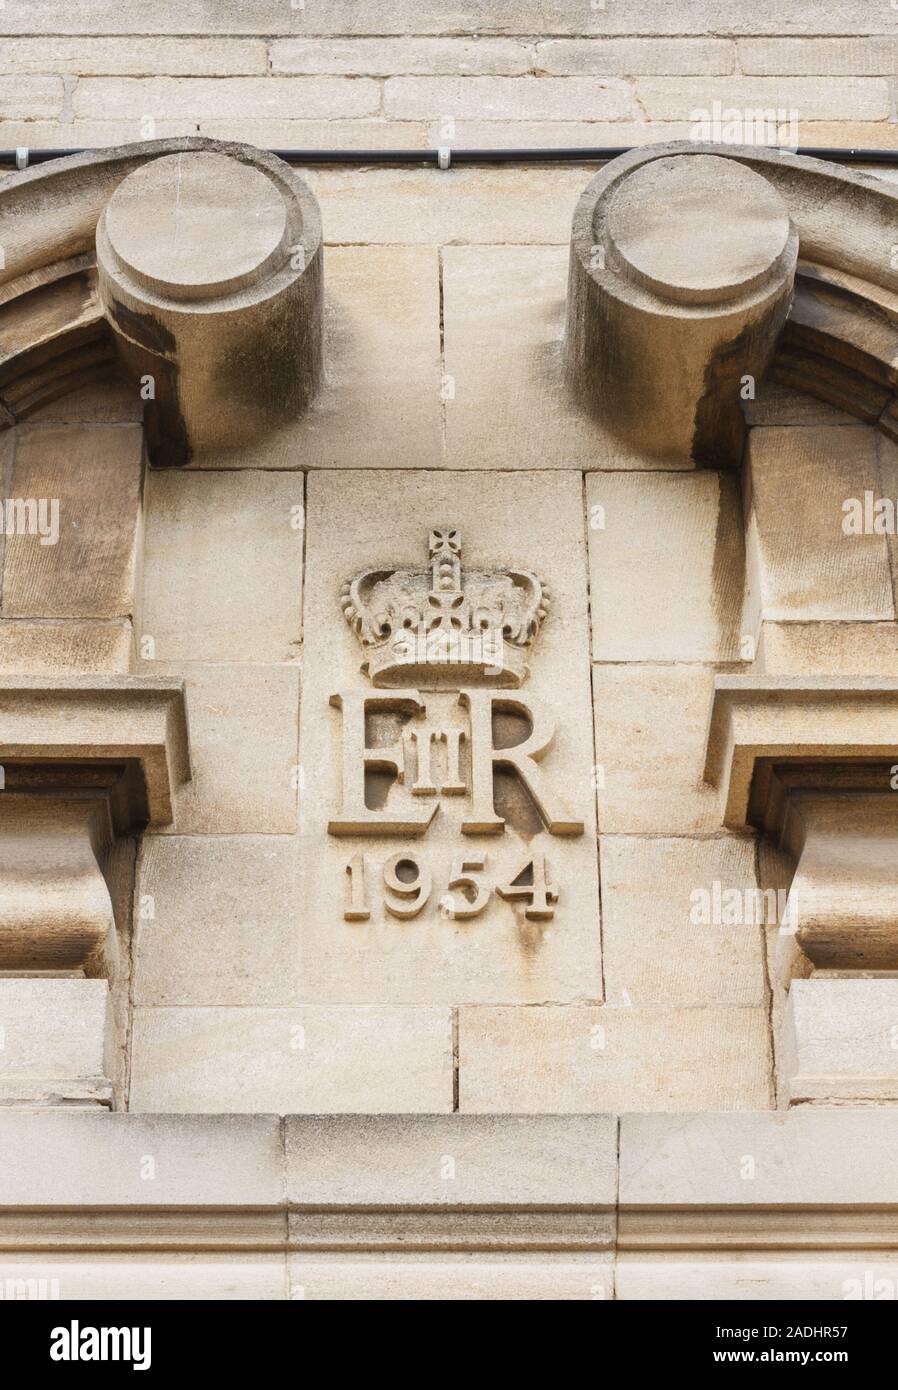 Royal Mail Post Office Oakham built in 1954 and close 2014. Above the main entrance carved in stone are the initials ER II. is Queen Elizabeth II Stock Photo